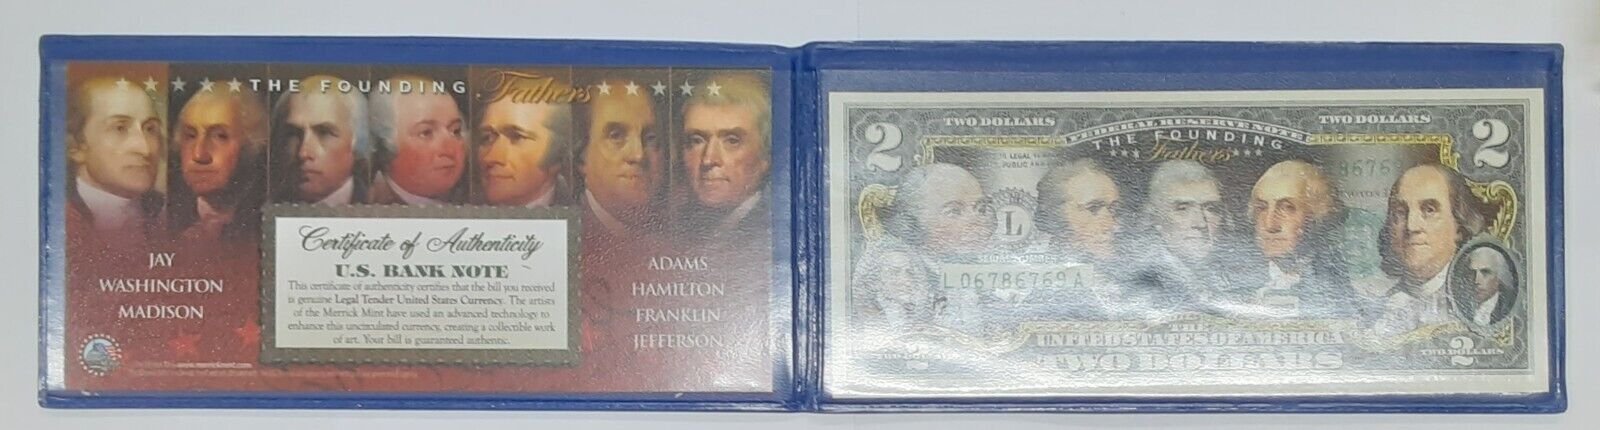 CU Colorized $2 FRN Commemorating the Founding Fathers in Info Folder